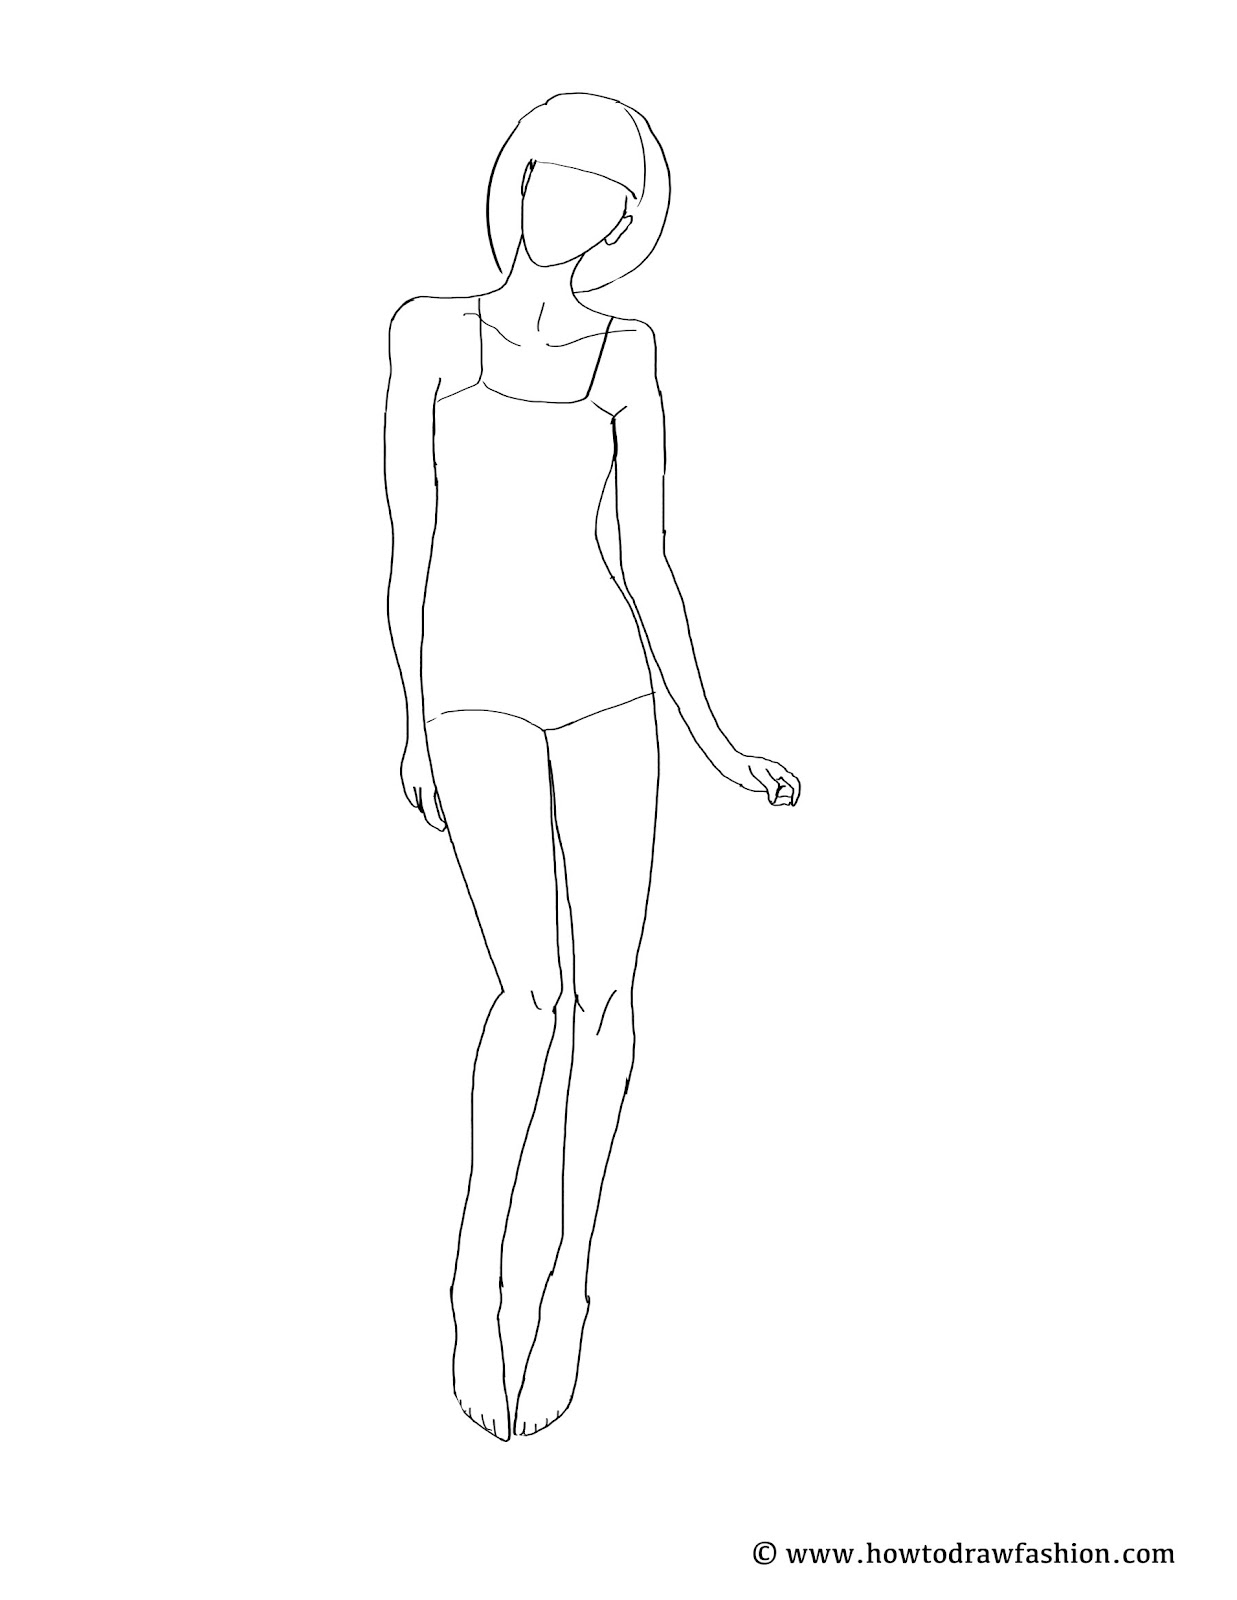 How To Draw A Body Sketch For Fashion - Draw-level